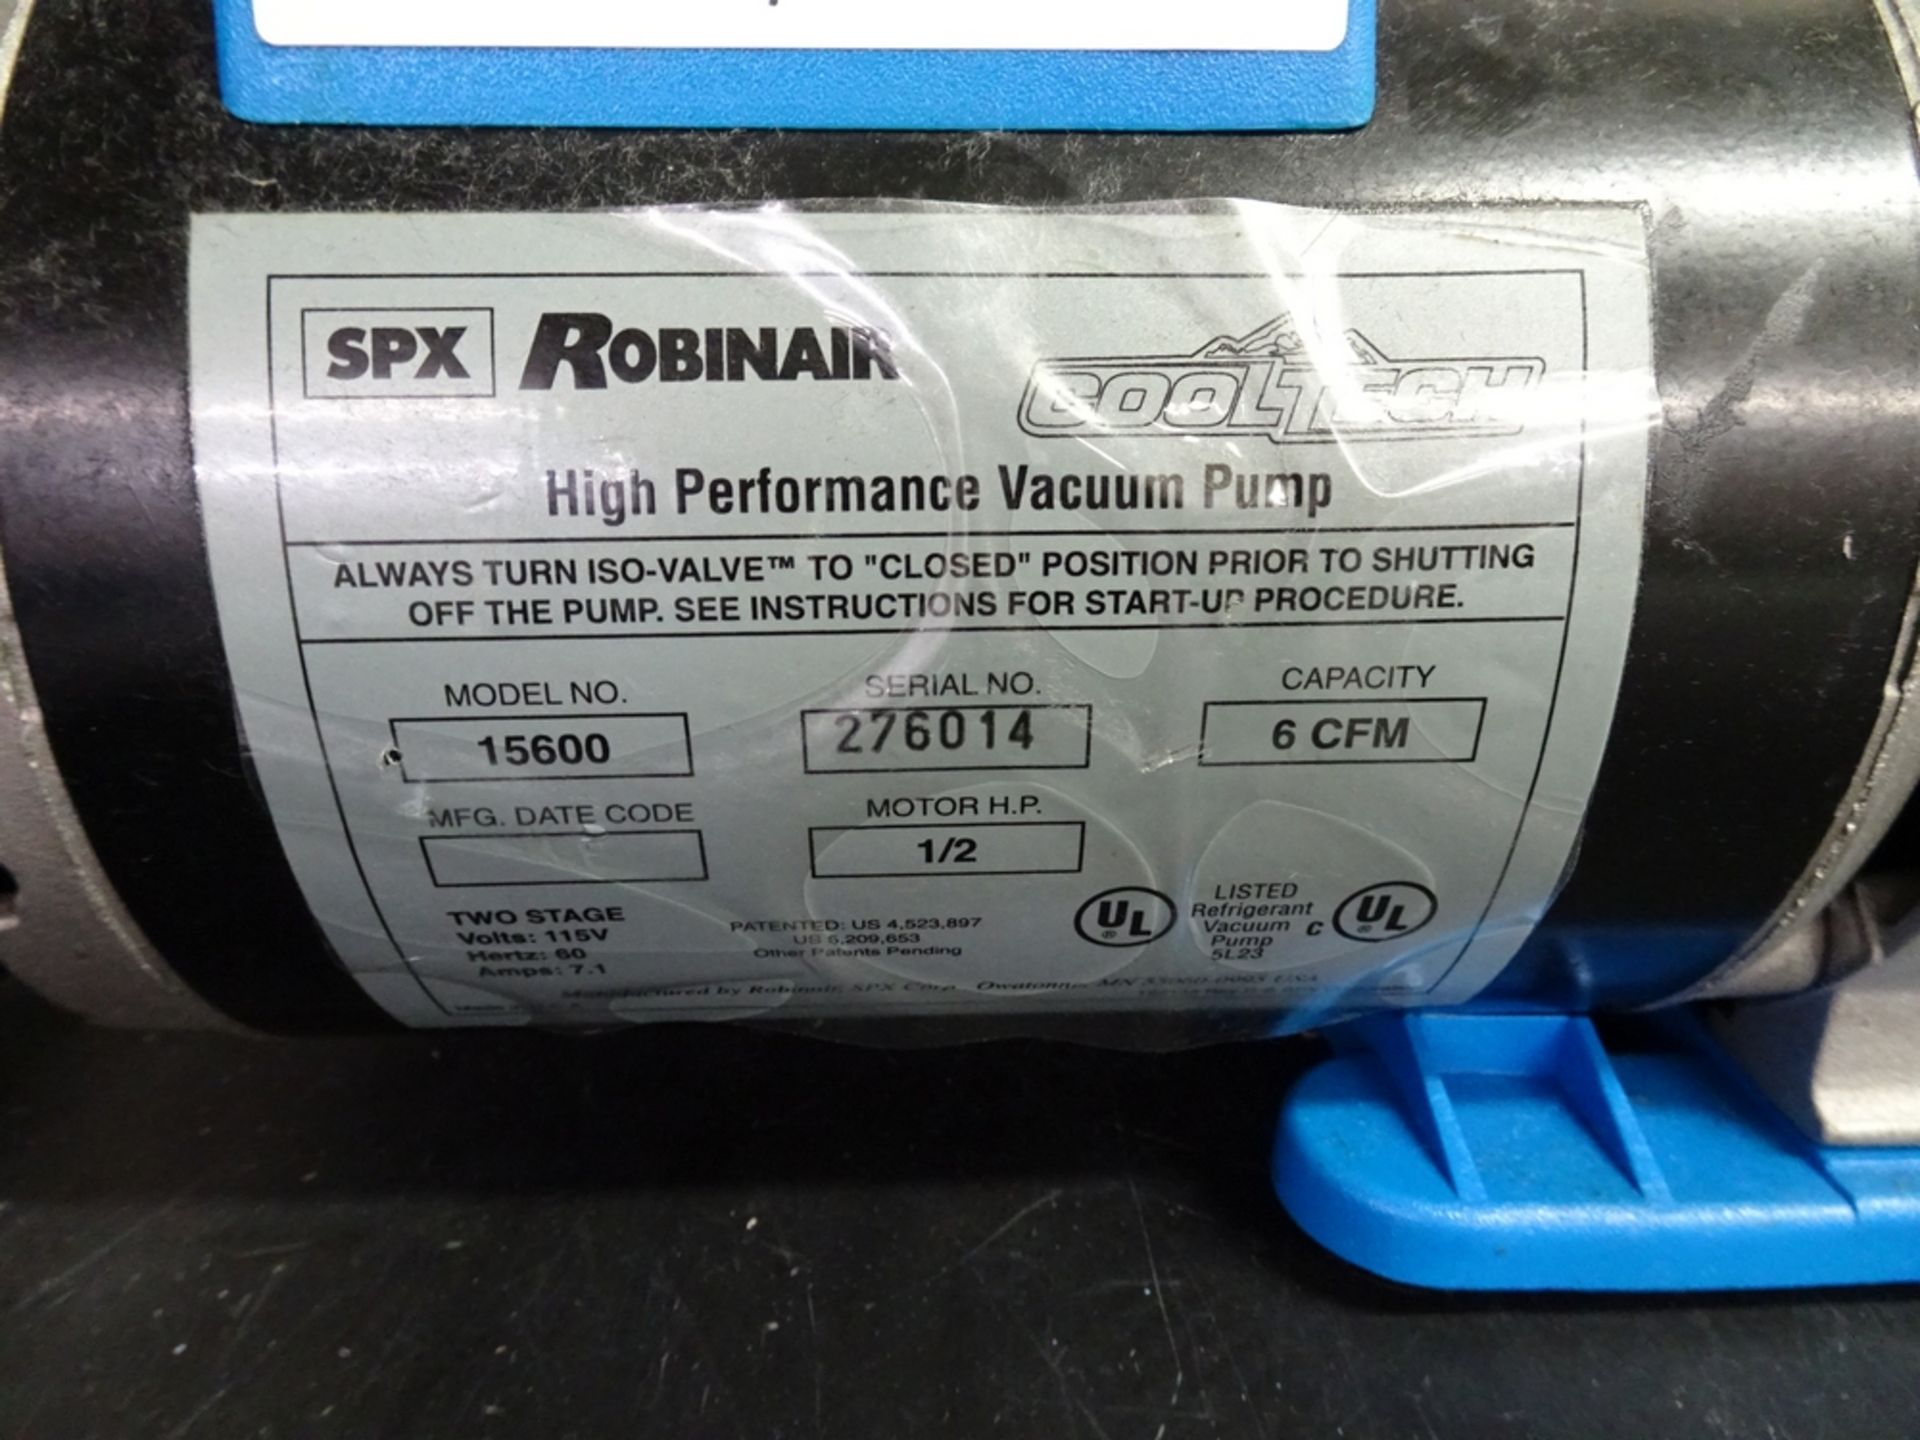 SPX Robinair Cooltech Series Model 15600 High Performance Vacuum Pump S/N 276014, Max. Capacity 60 - Image 2 of 2